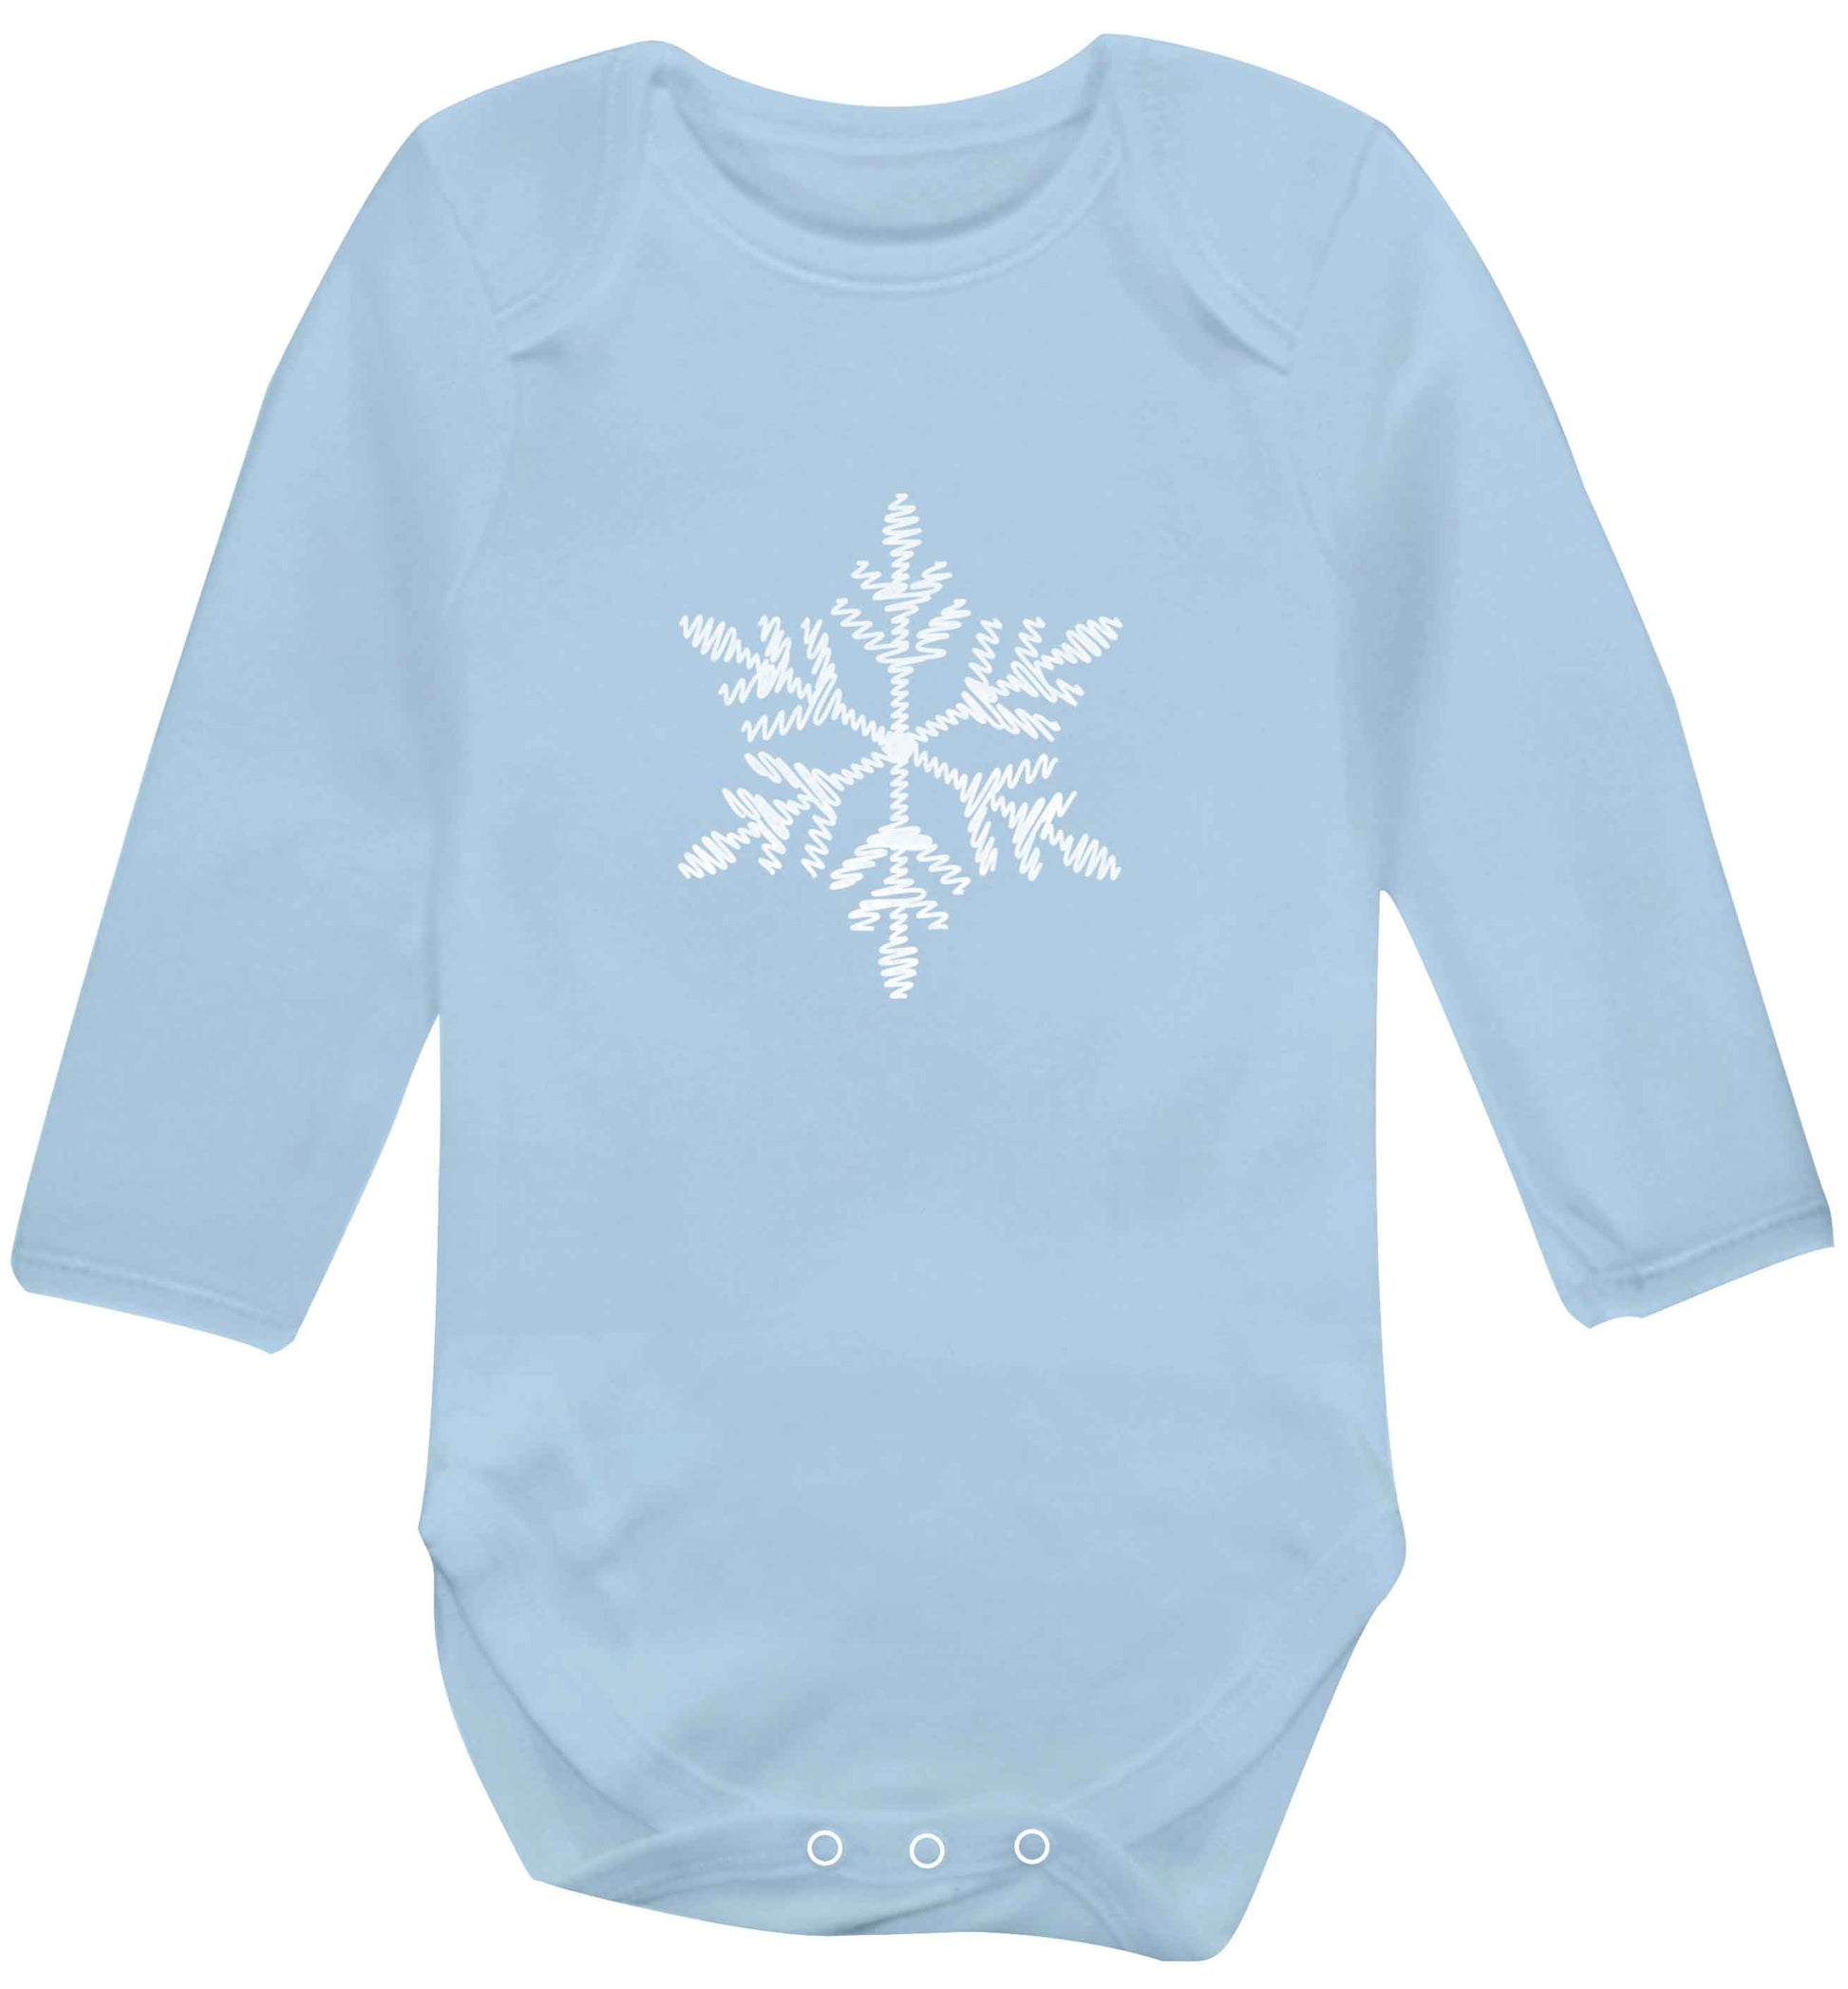 Snowflake baby vest long sleeved pale blue 6-12 months